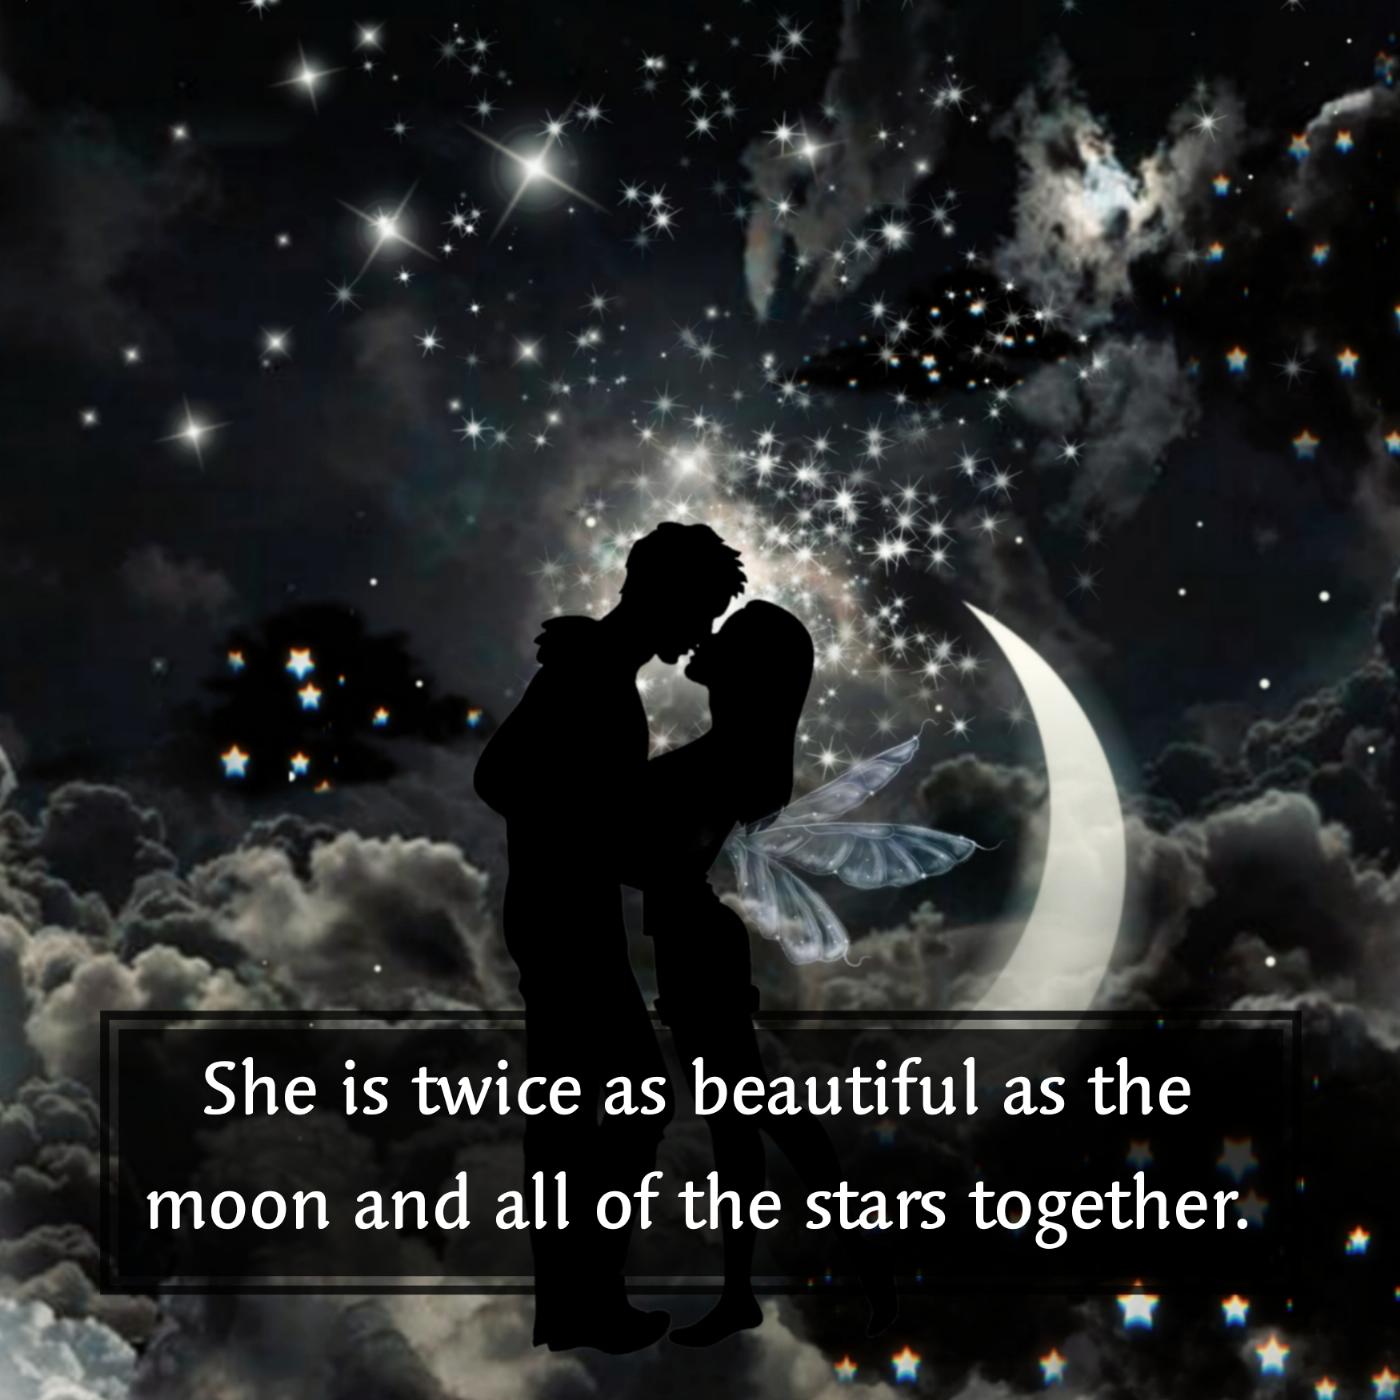 She is twice as beautiful as the moon